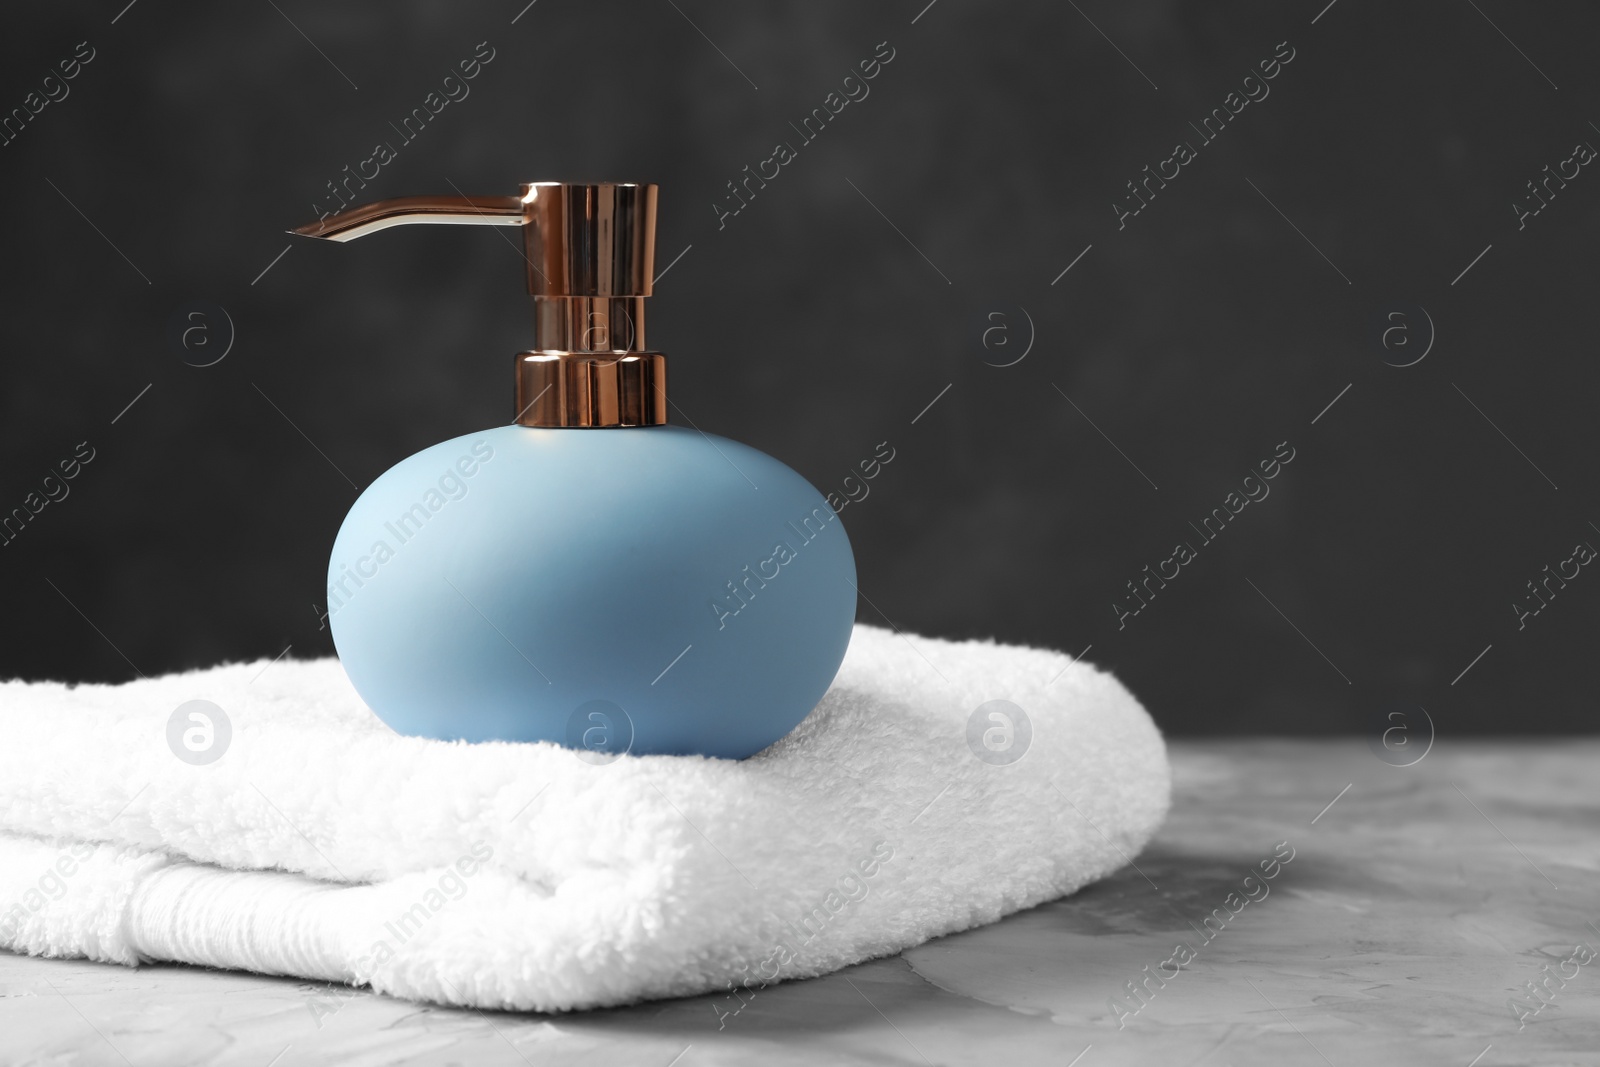 Photo of New stylish soap dispenser and towel on table. Space for text